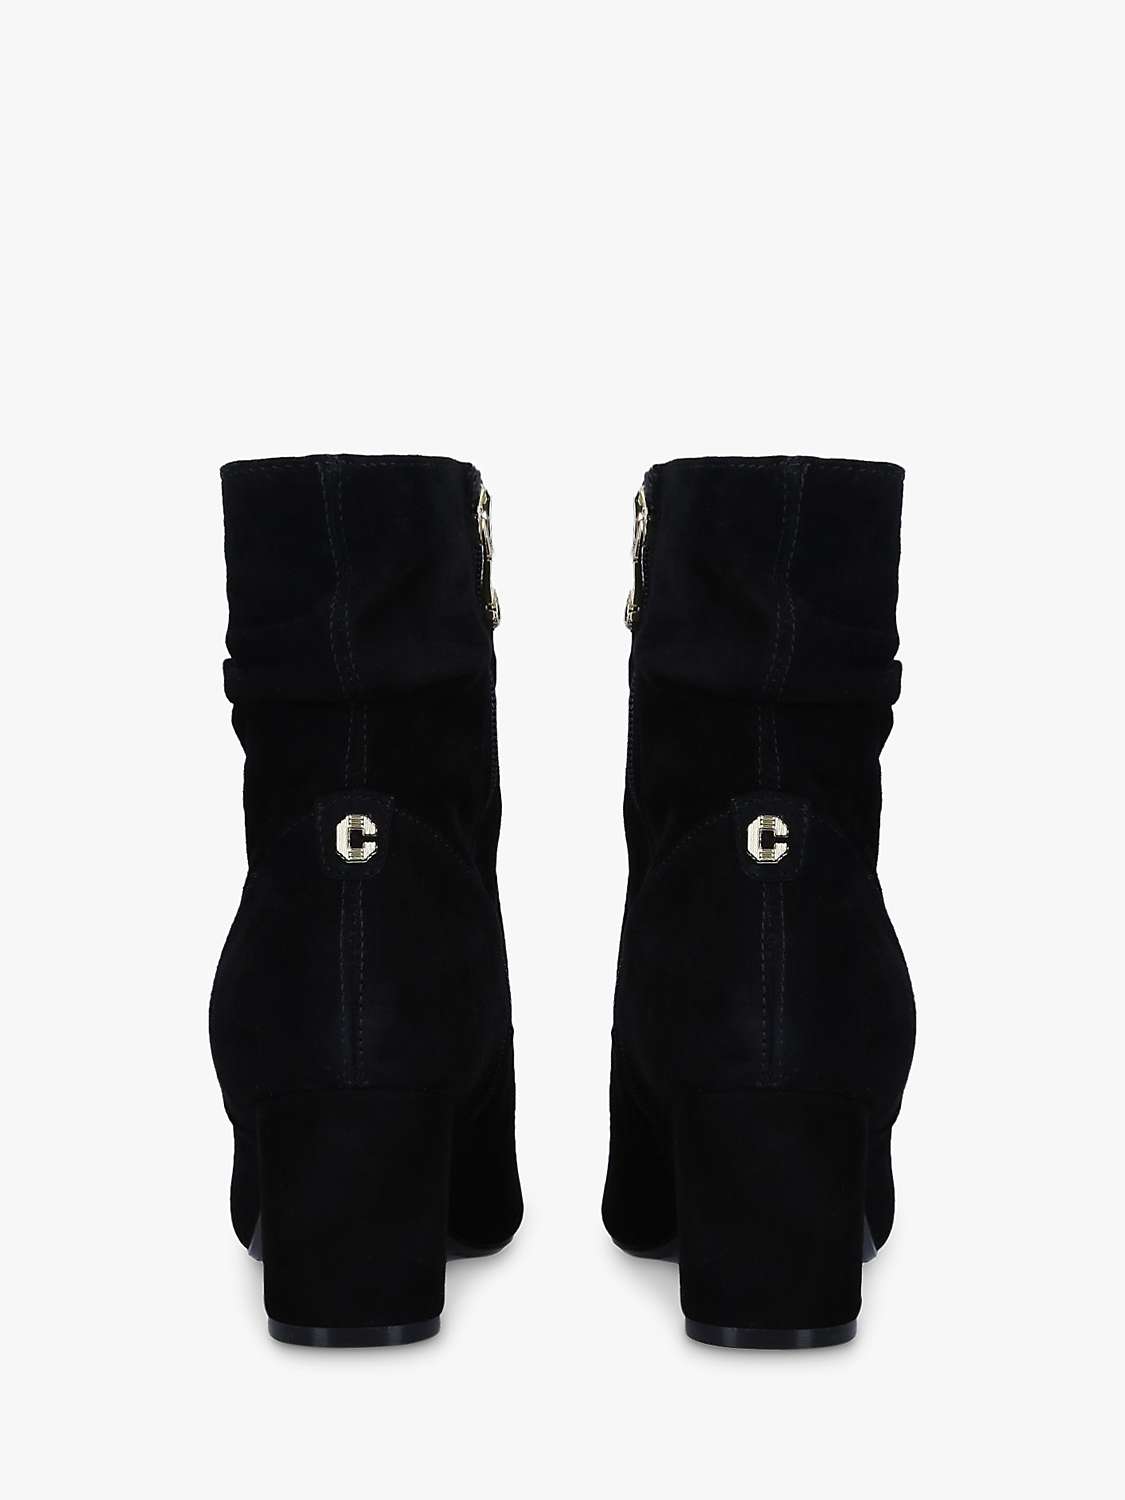 Buy Carvela Admire Low Slouch Suede Ankle Boots Online at johnlewis.com